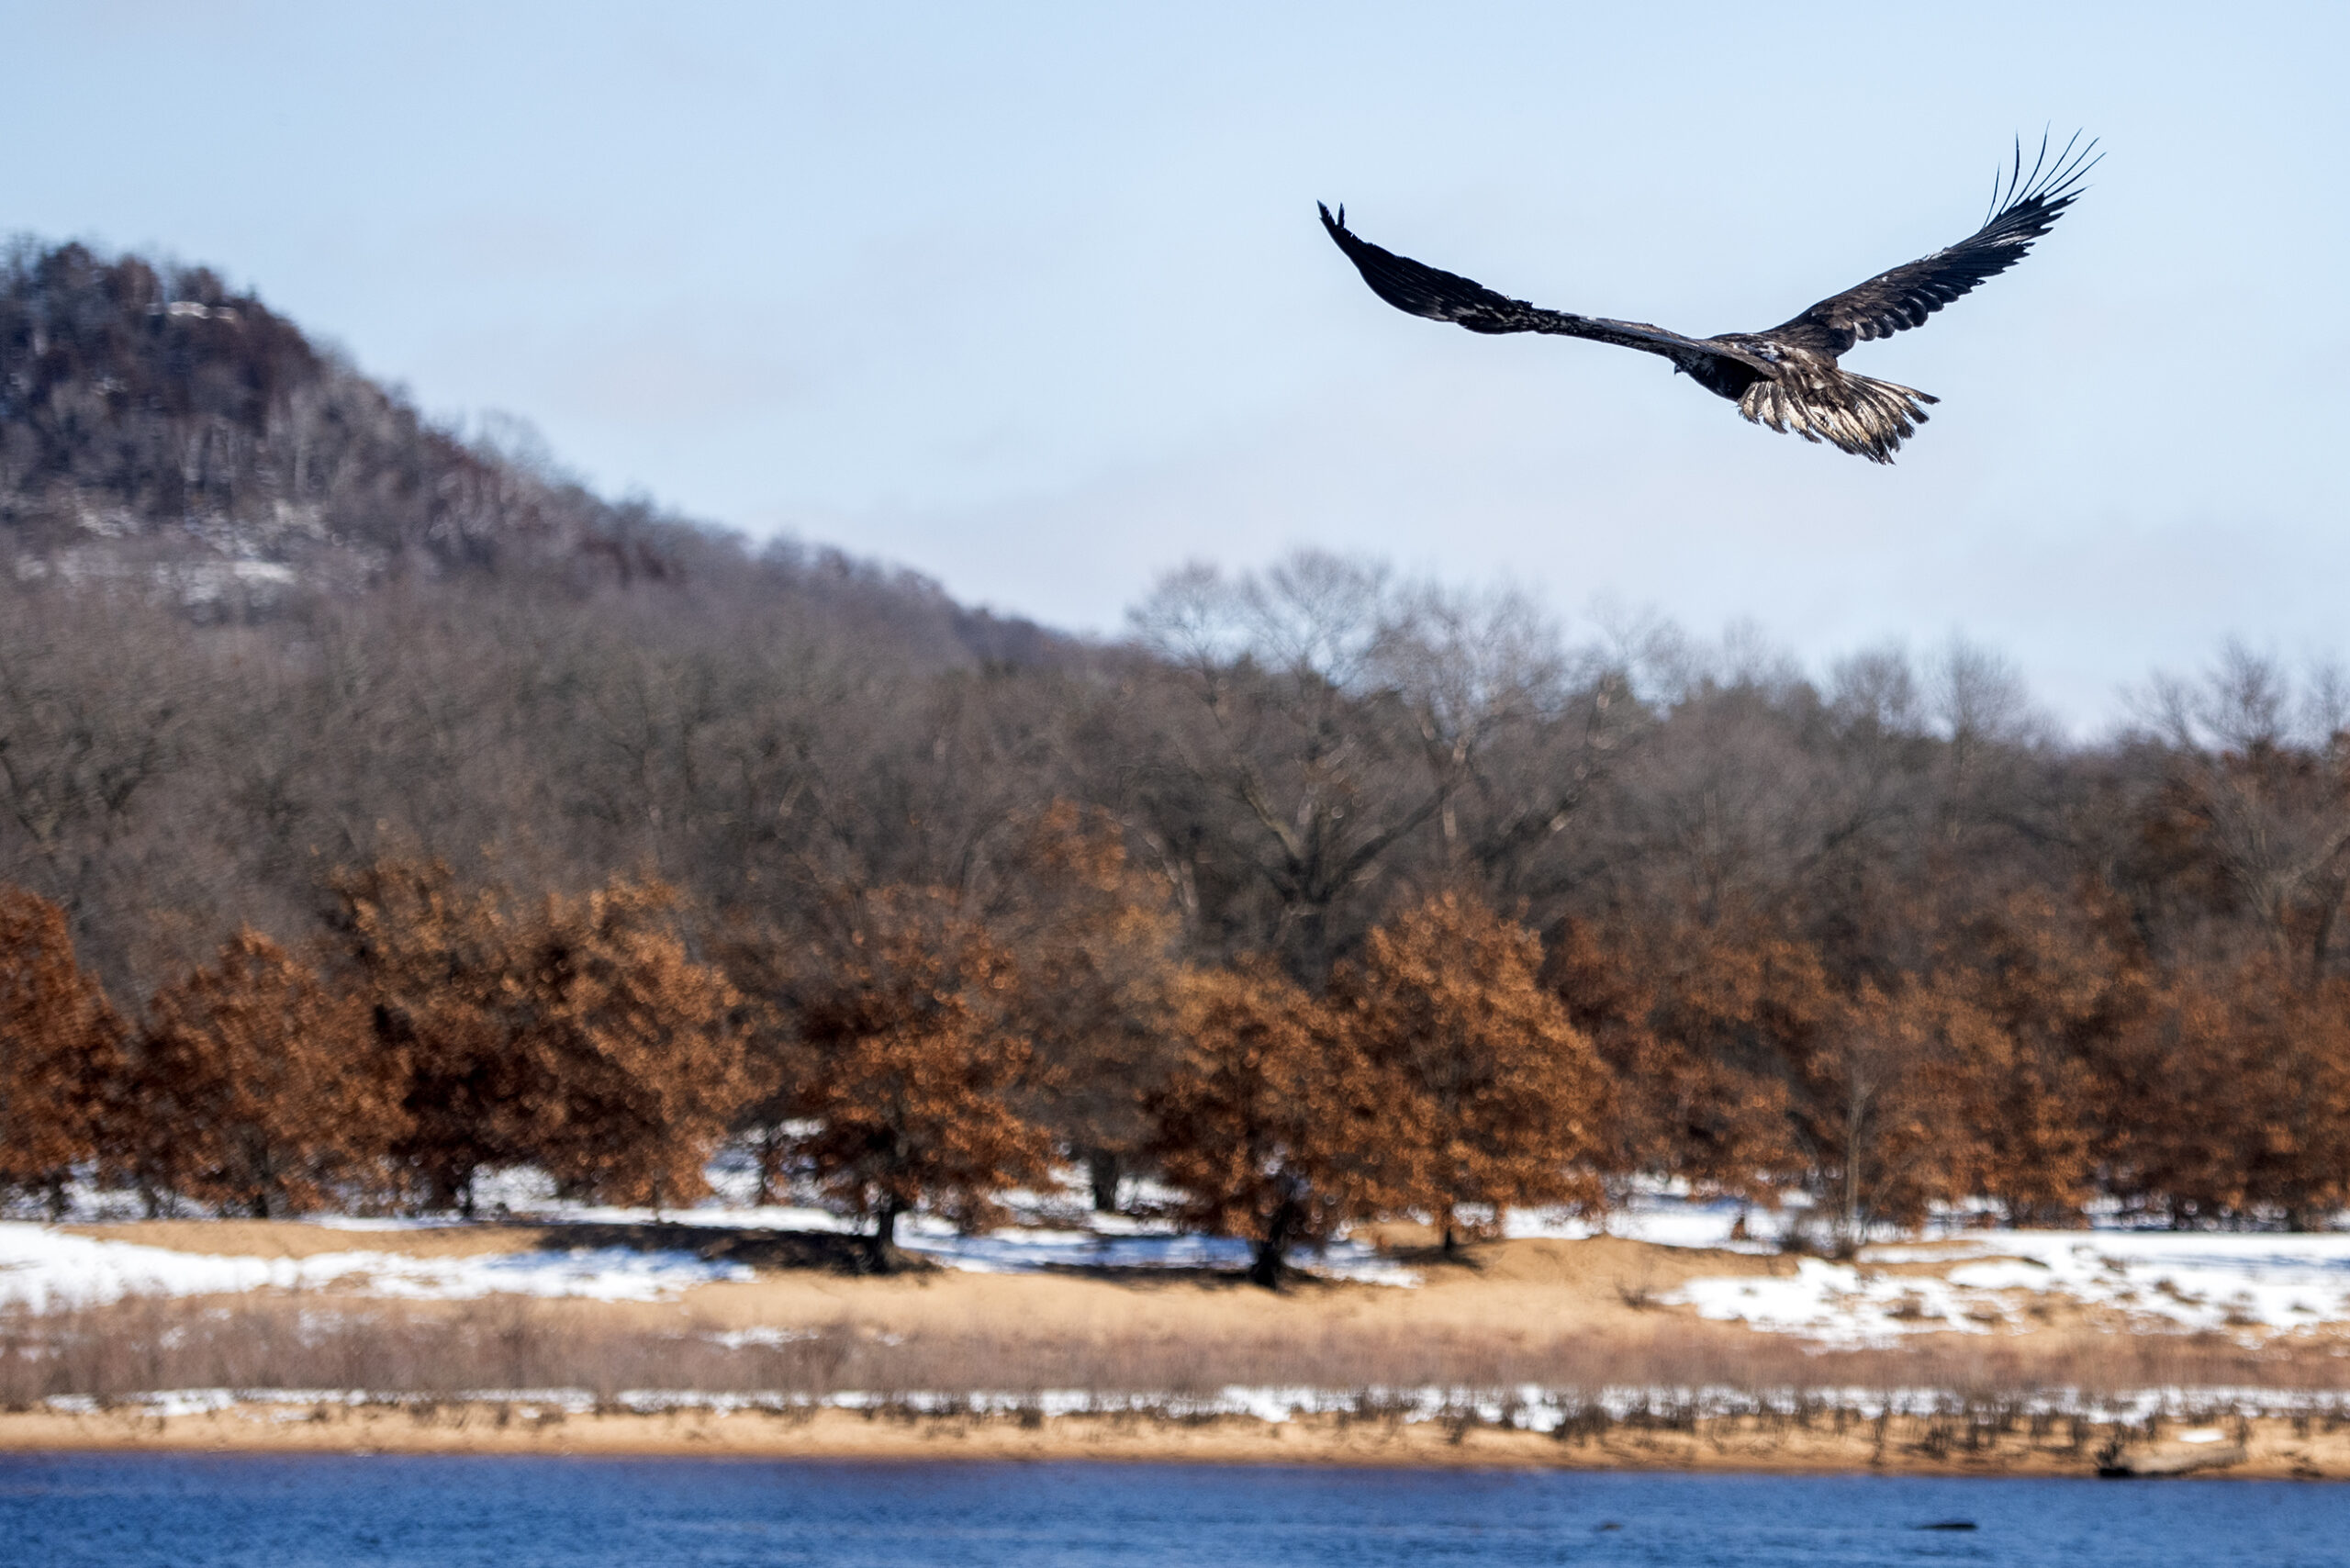 An eagle soars through the air. A hill and snowy landscape near a river can be seen in the distance.